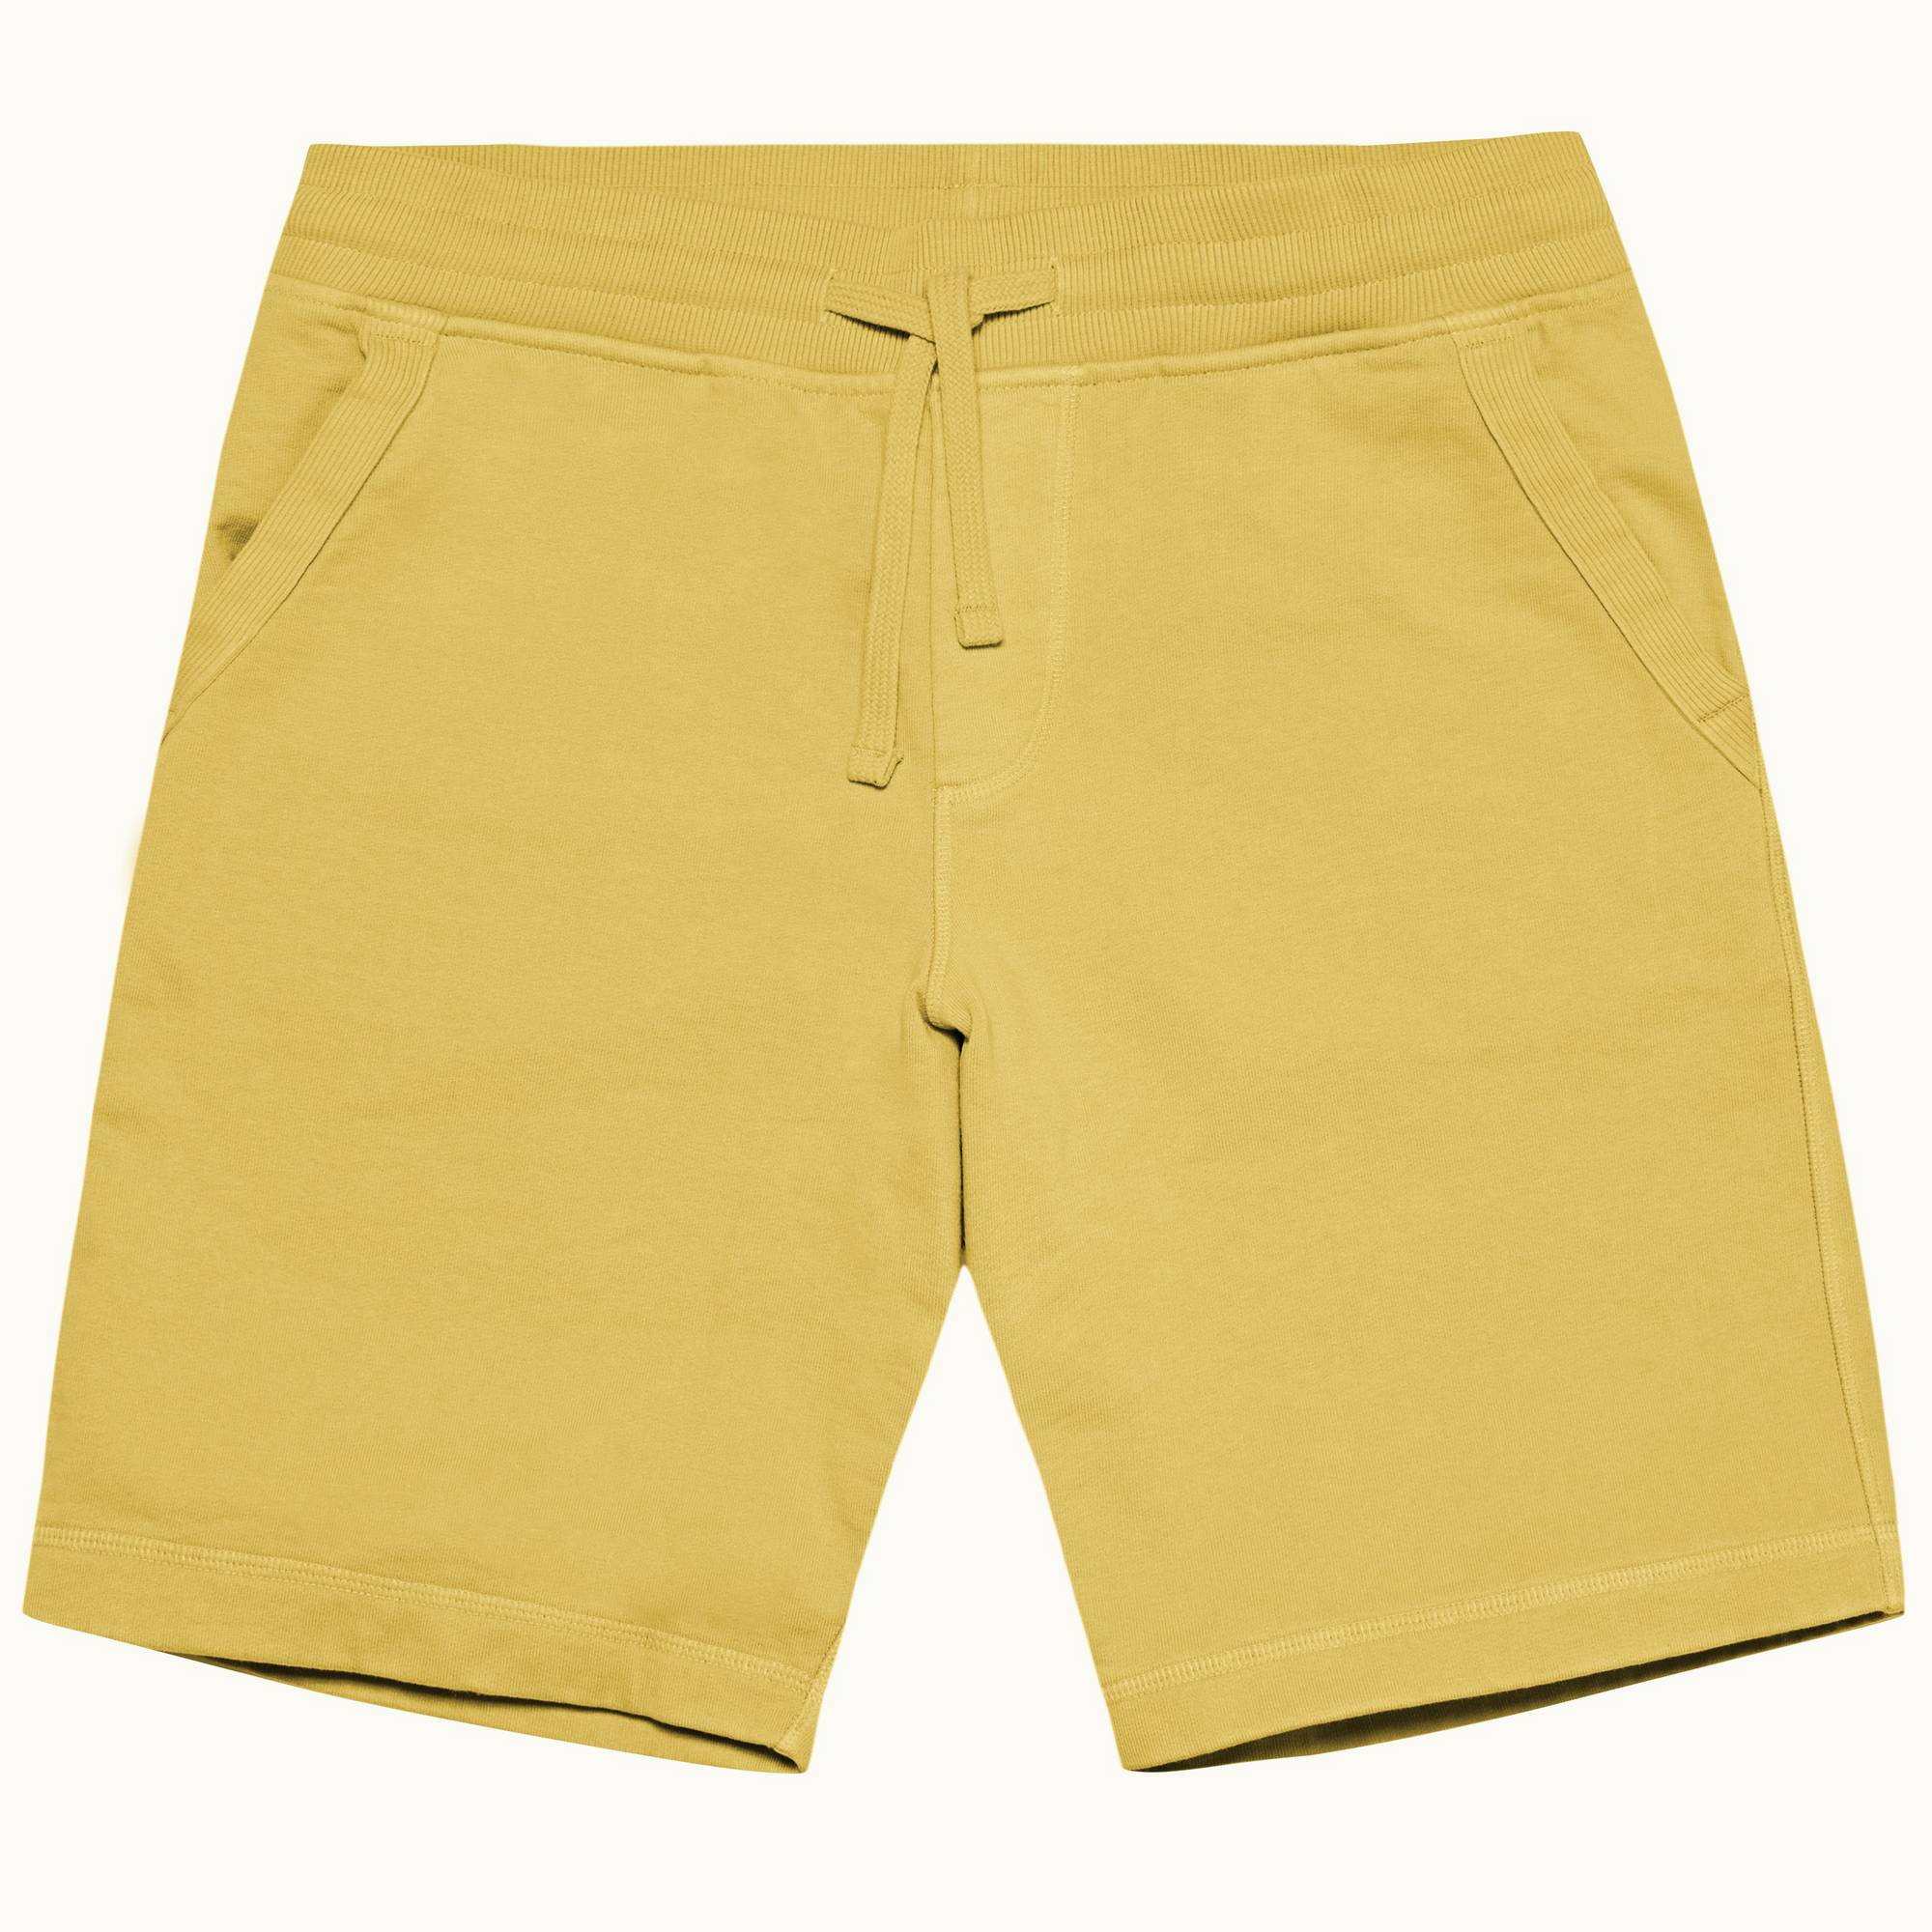 Frederick - Mens Seed Garment Washed Cotton Sweat Shorts